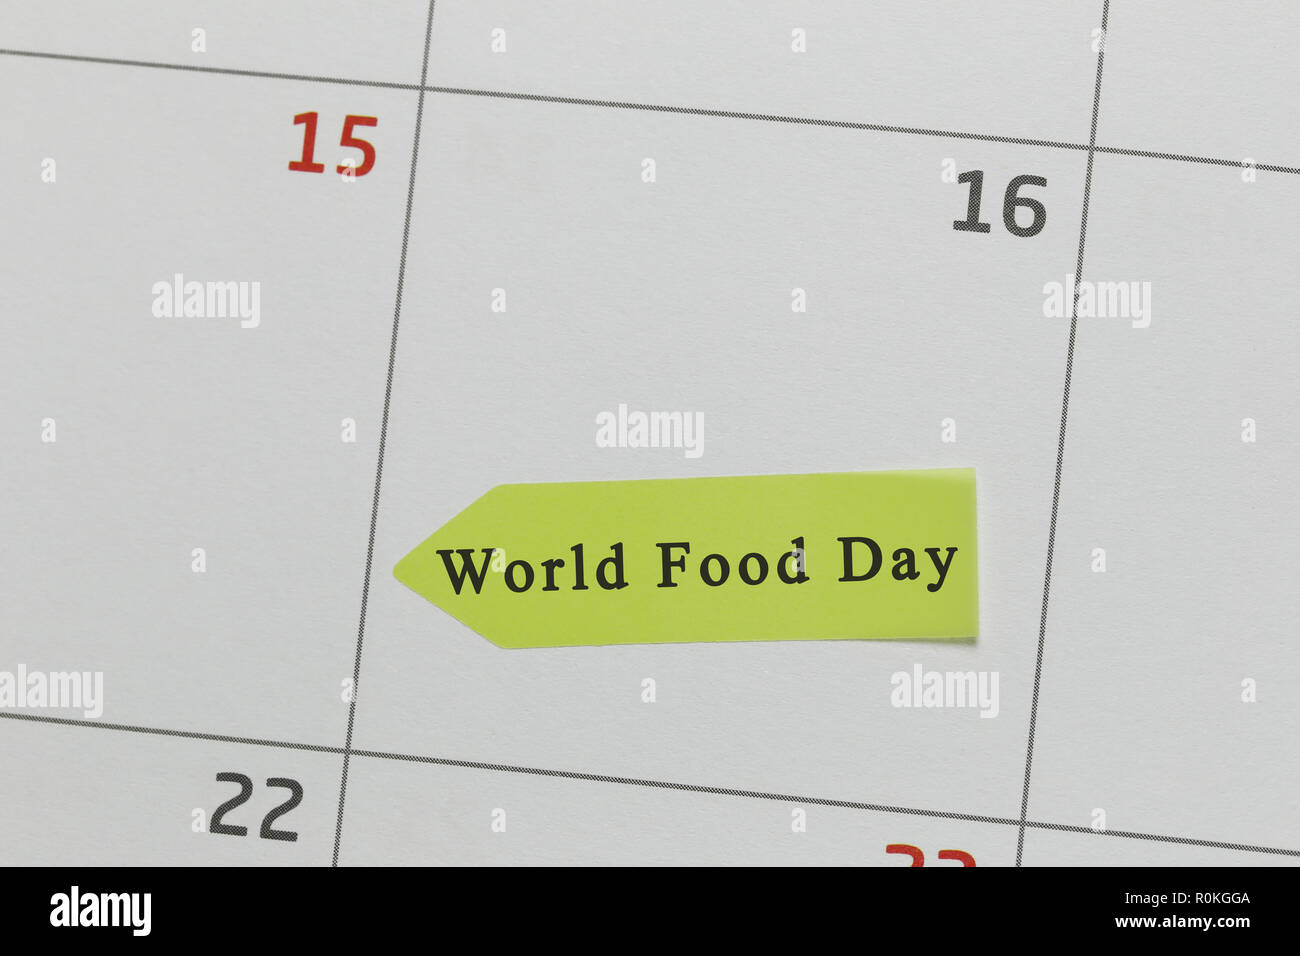 Calendar on 16 in world food day and have copy space for input idea to work concept. Stock Photo